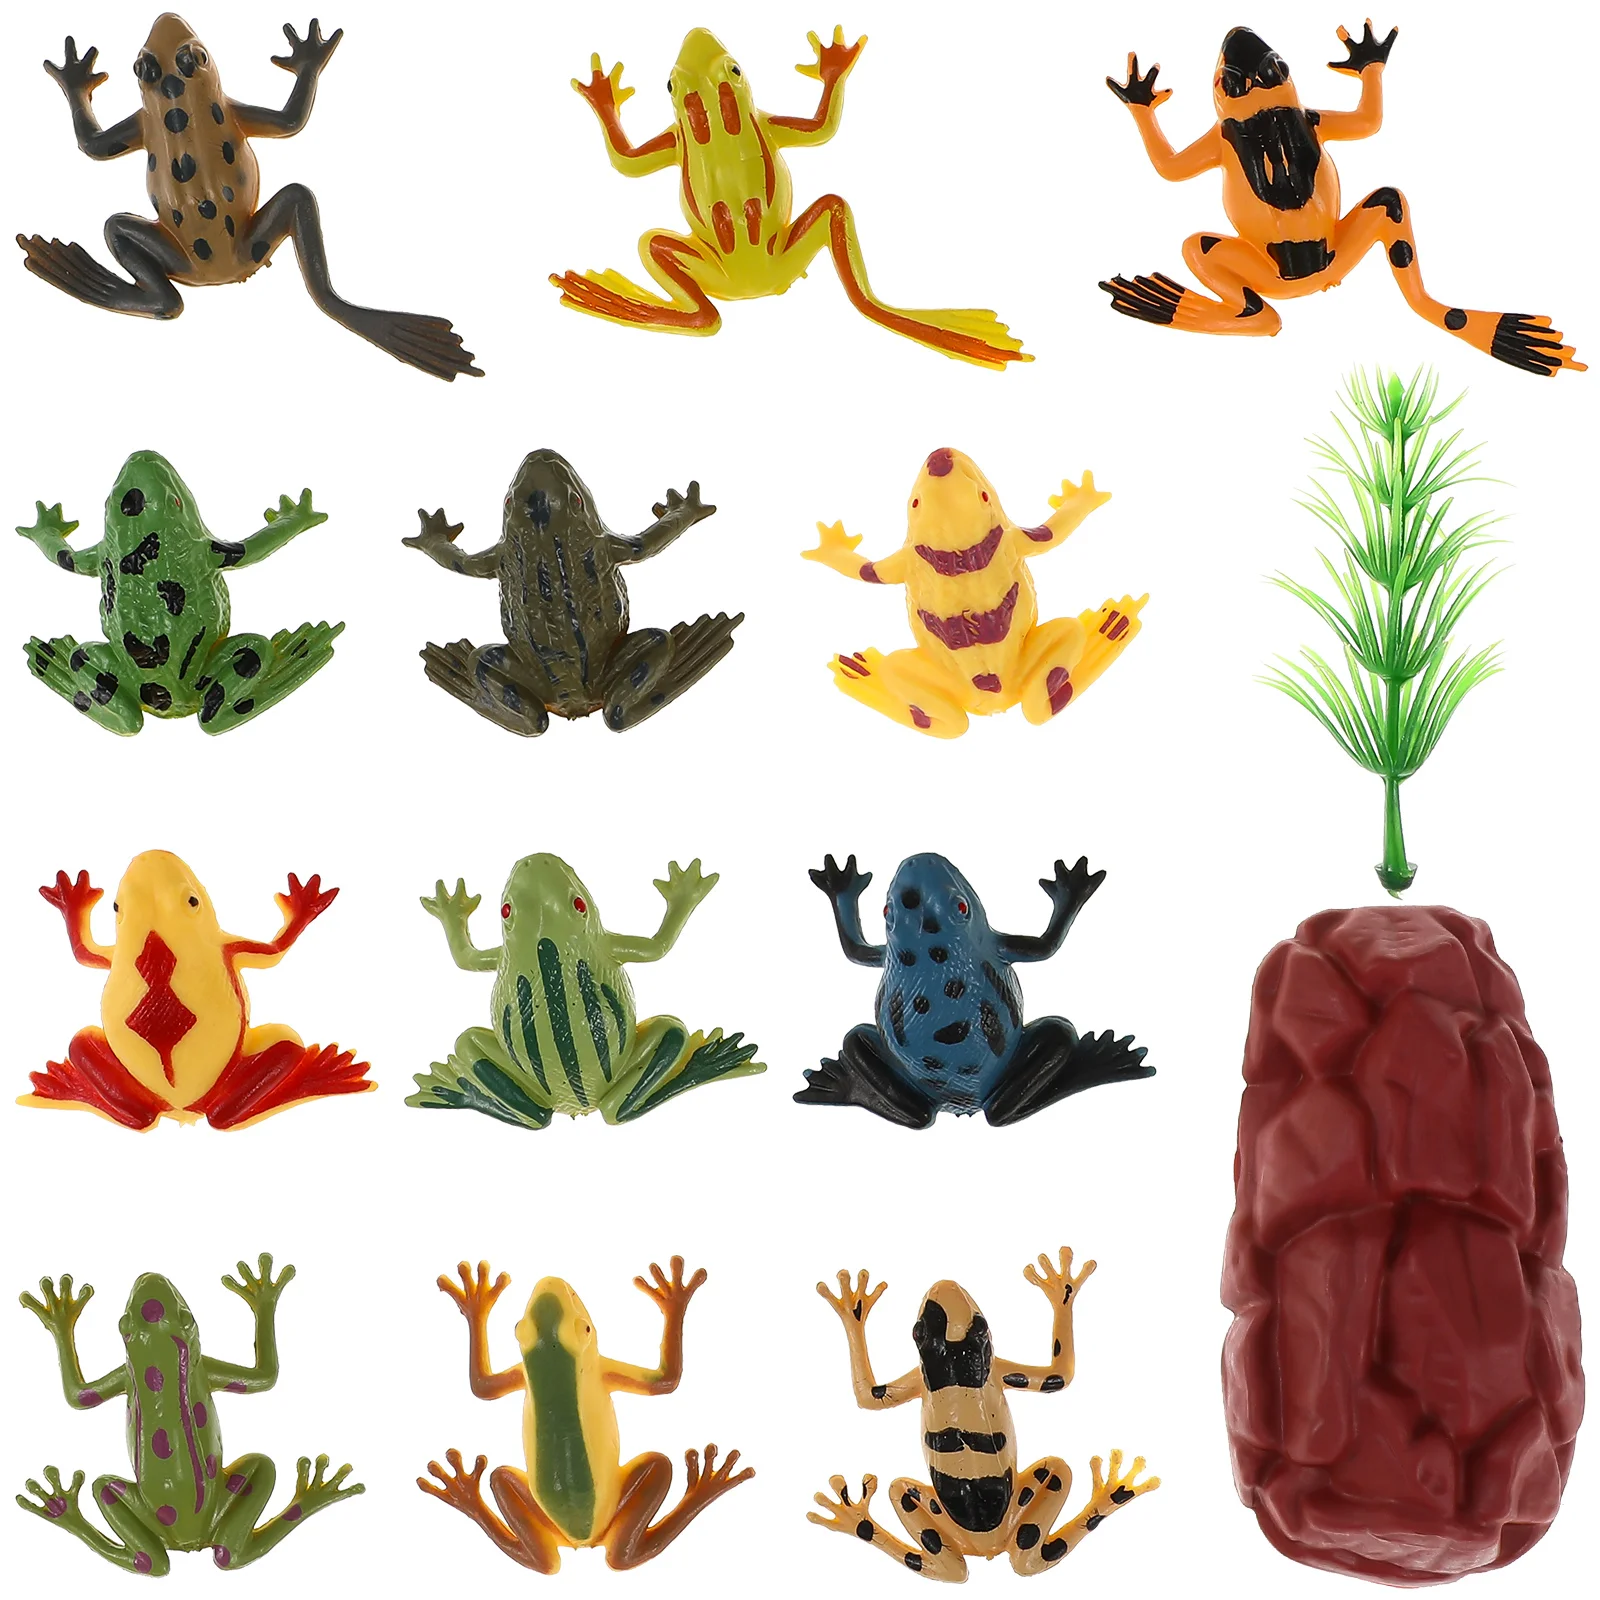 

1 Set Miniature Frogs Ornaments Tiny Lifelike Animals Figurines with Grass and Fake Stone for House Garden Miniature